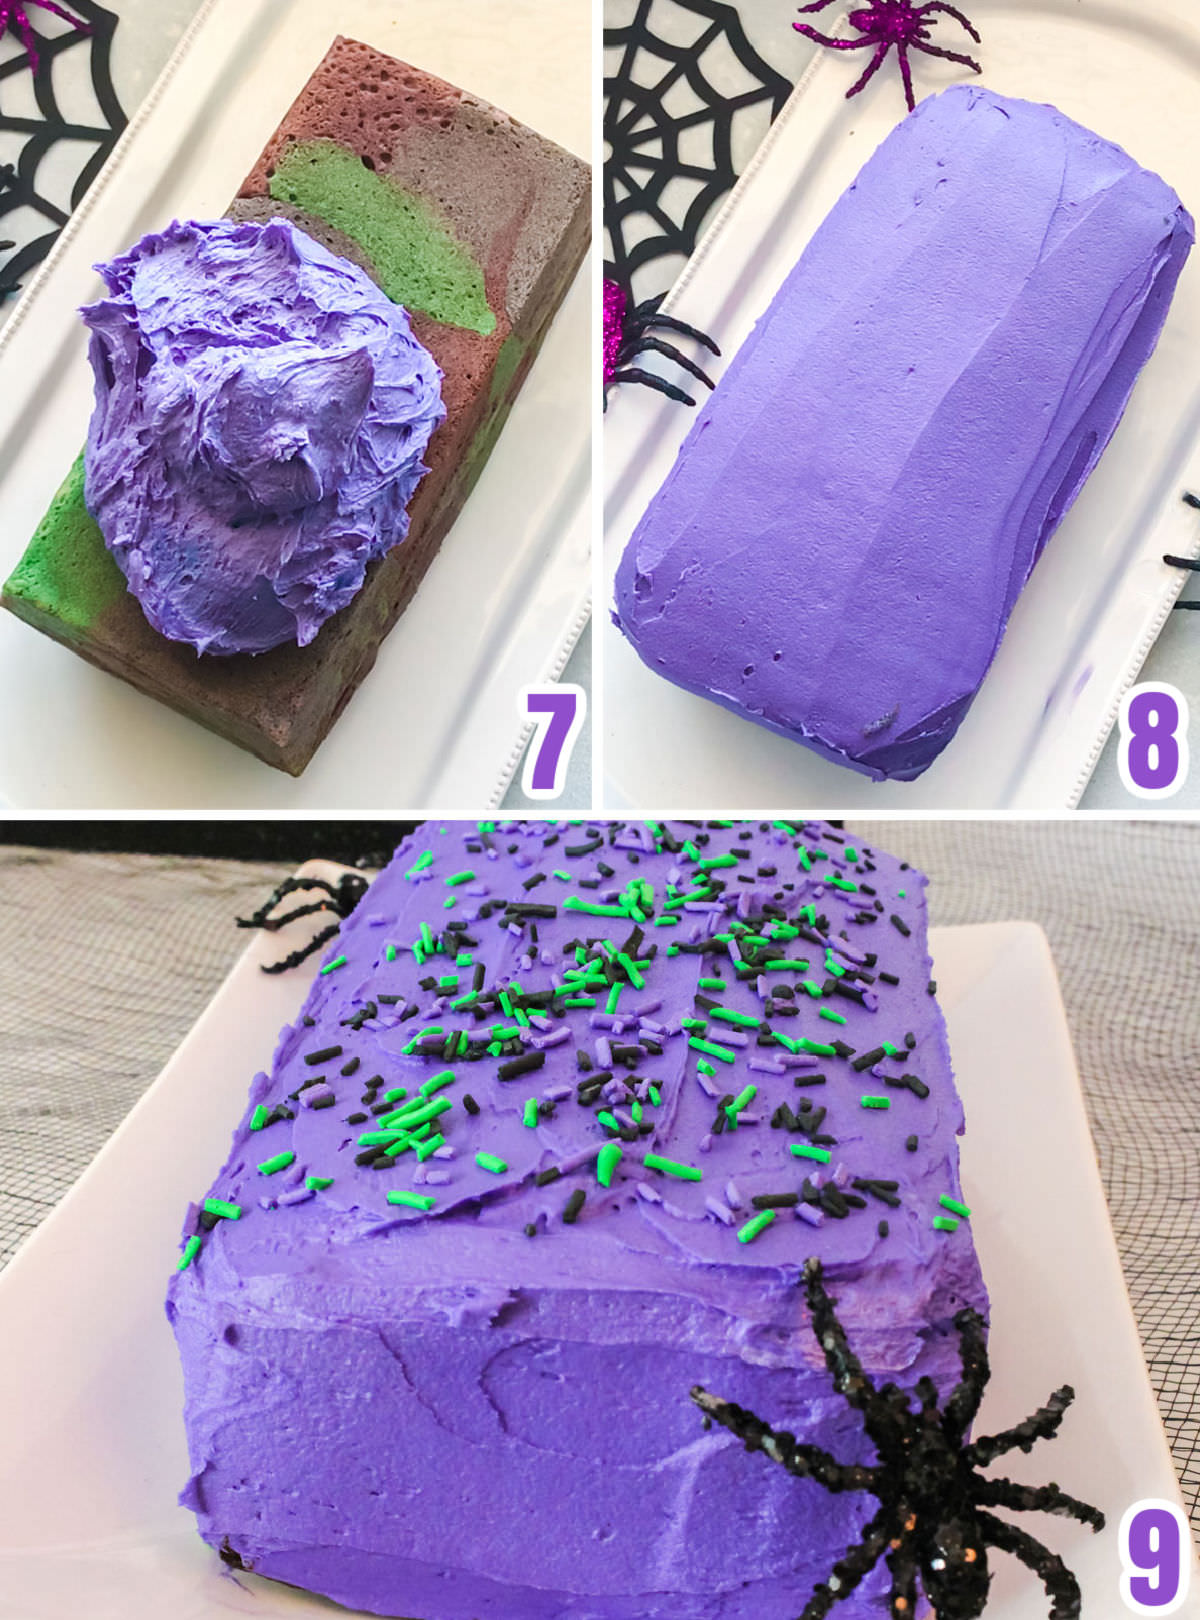 Collage image showing the steps for decorating the cake including frosting it and adding Halloween sprinkles.